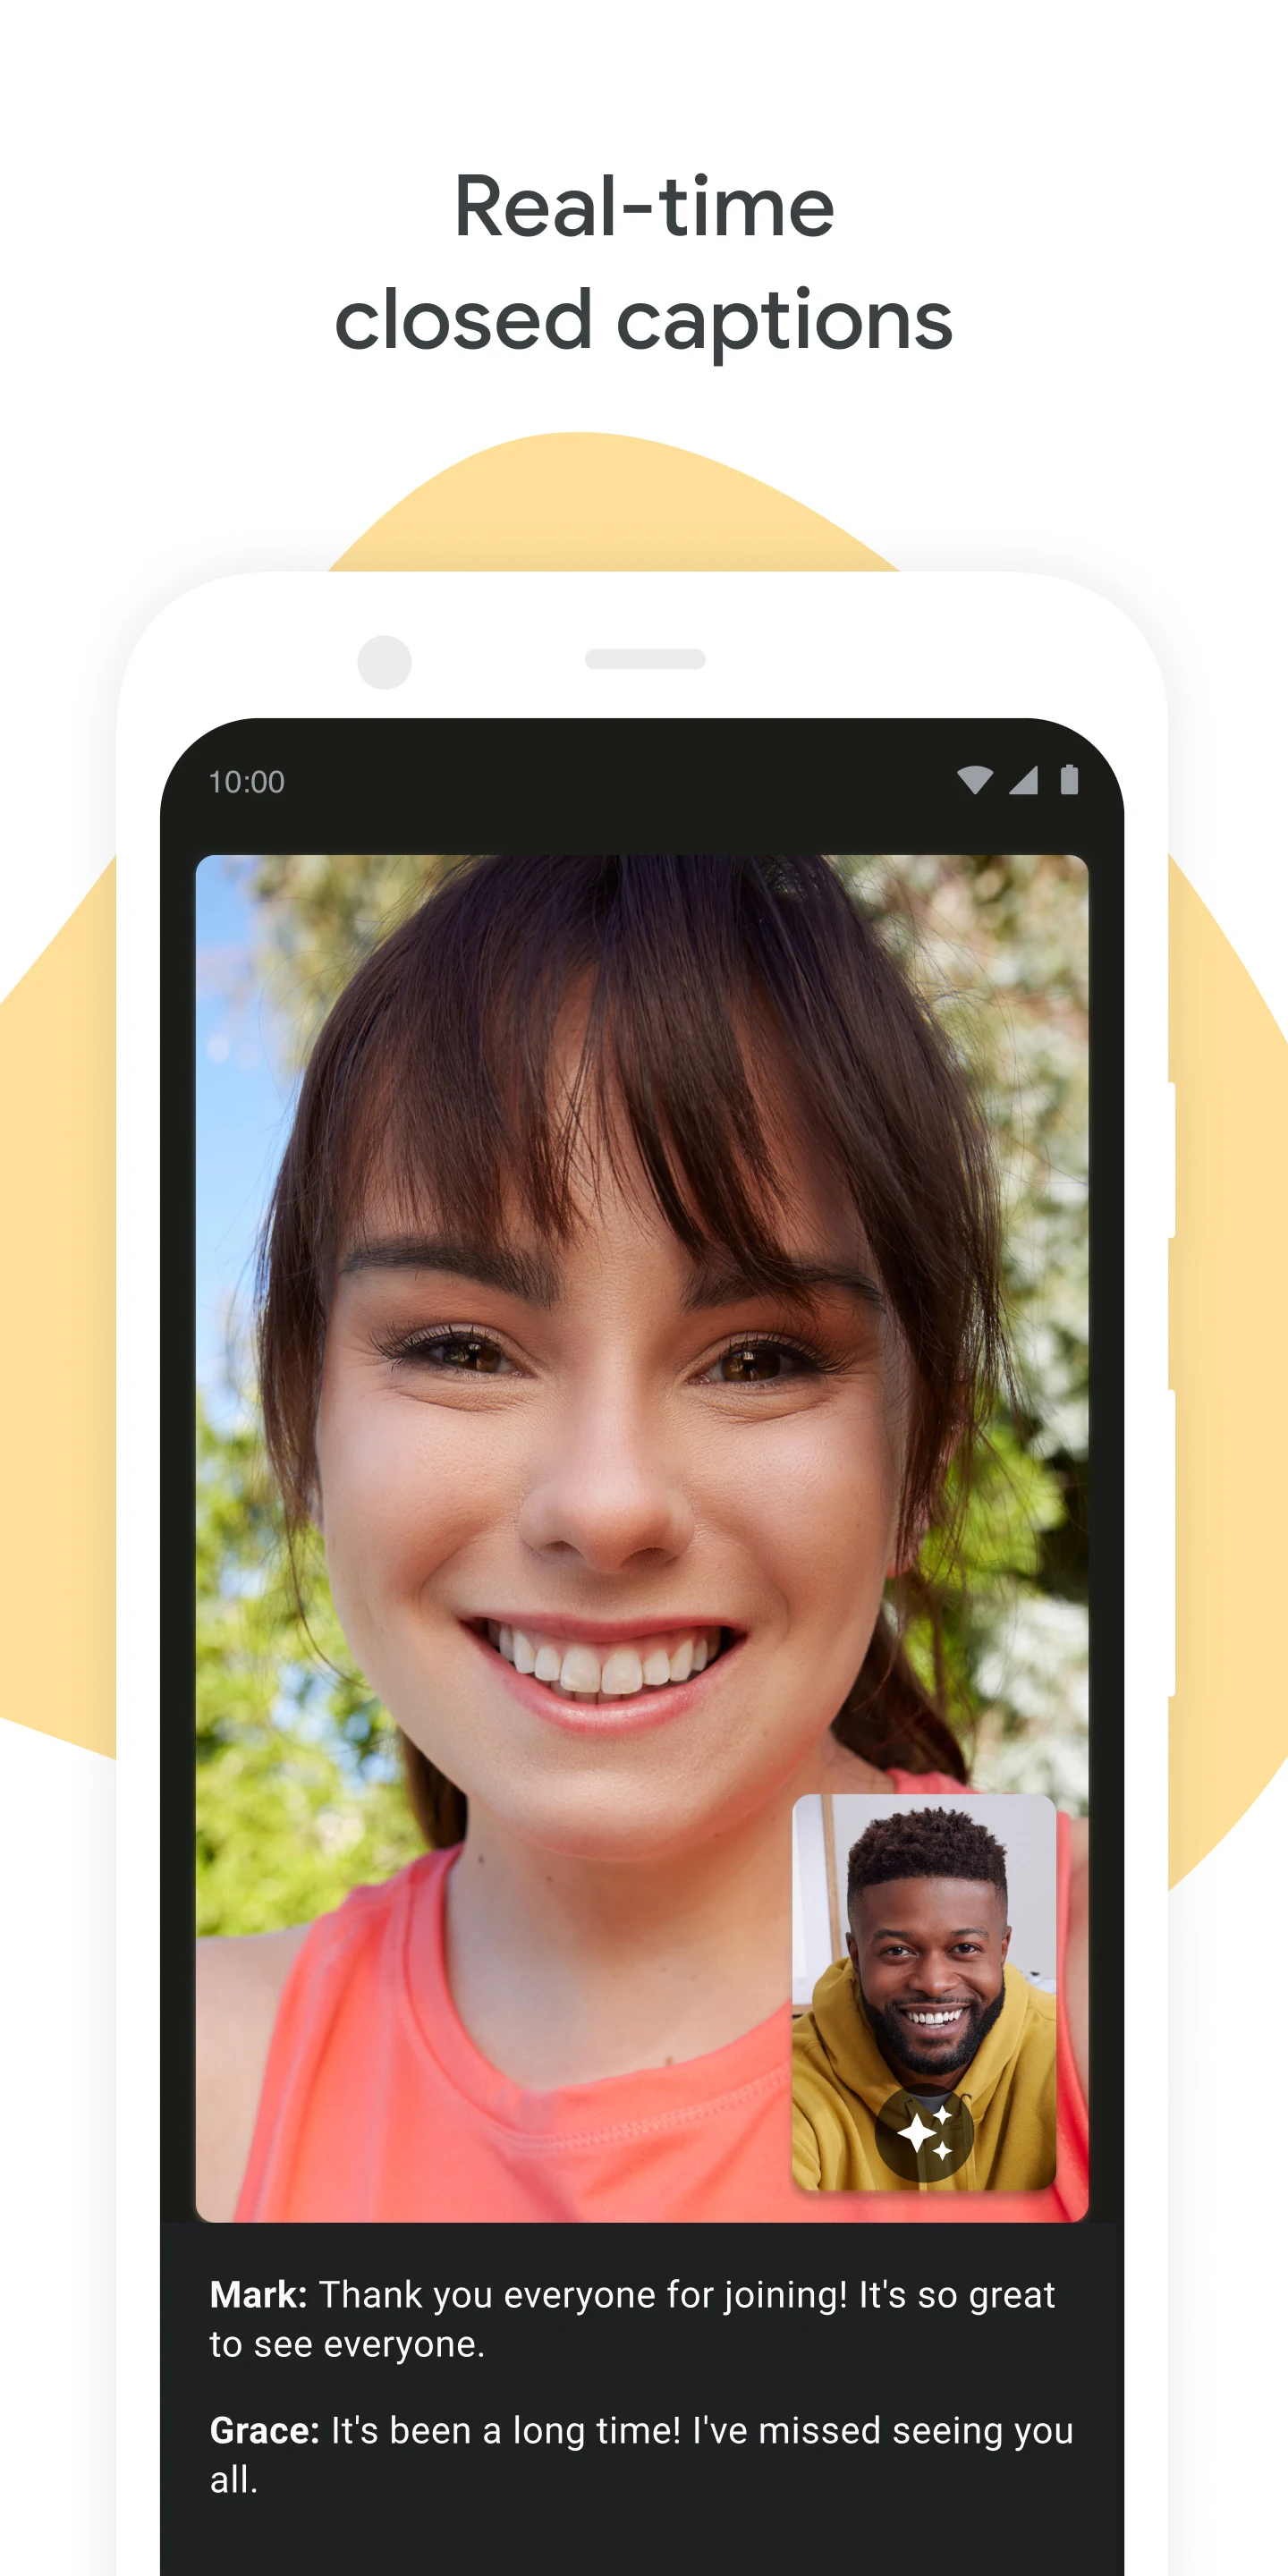 download google duo for pc